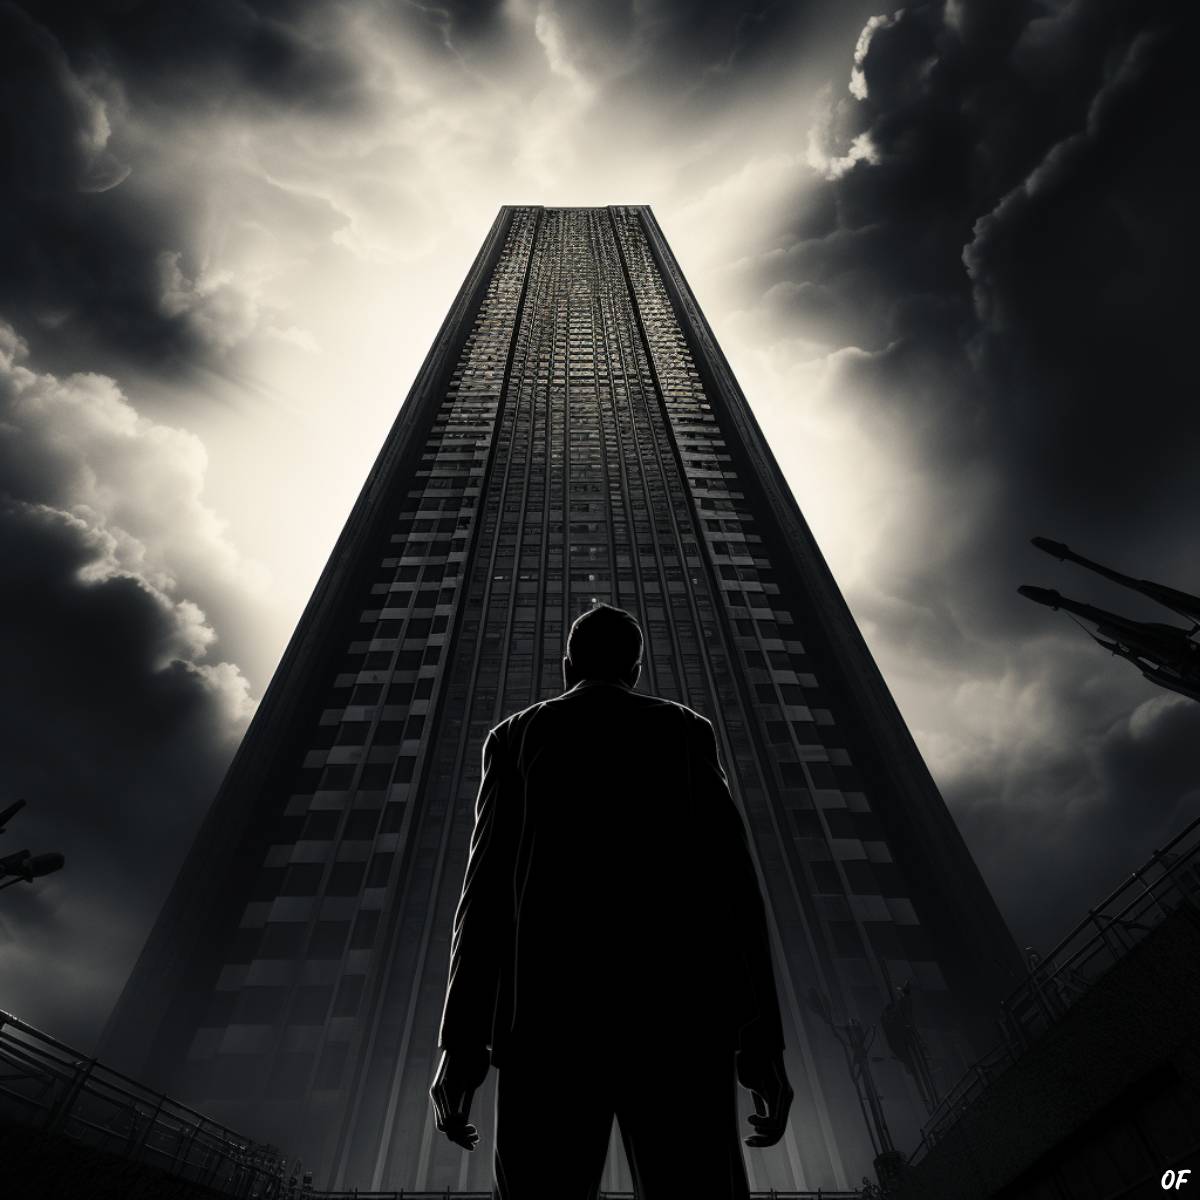 A man standing in front of a towering building.